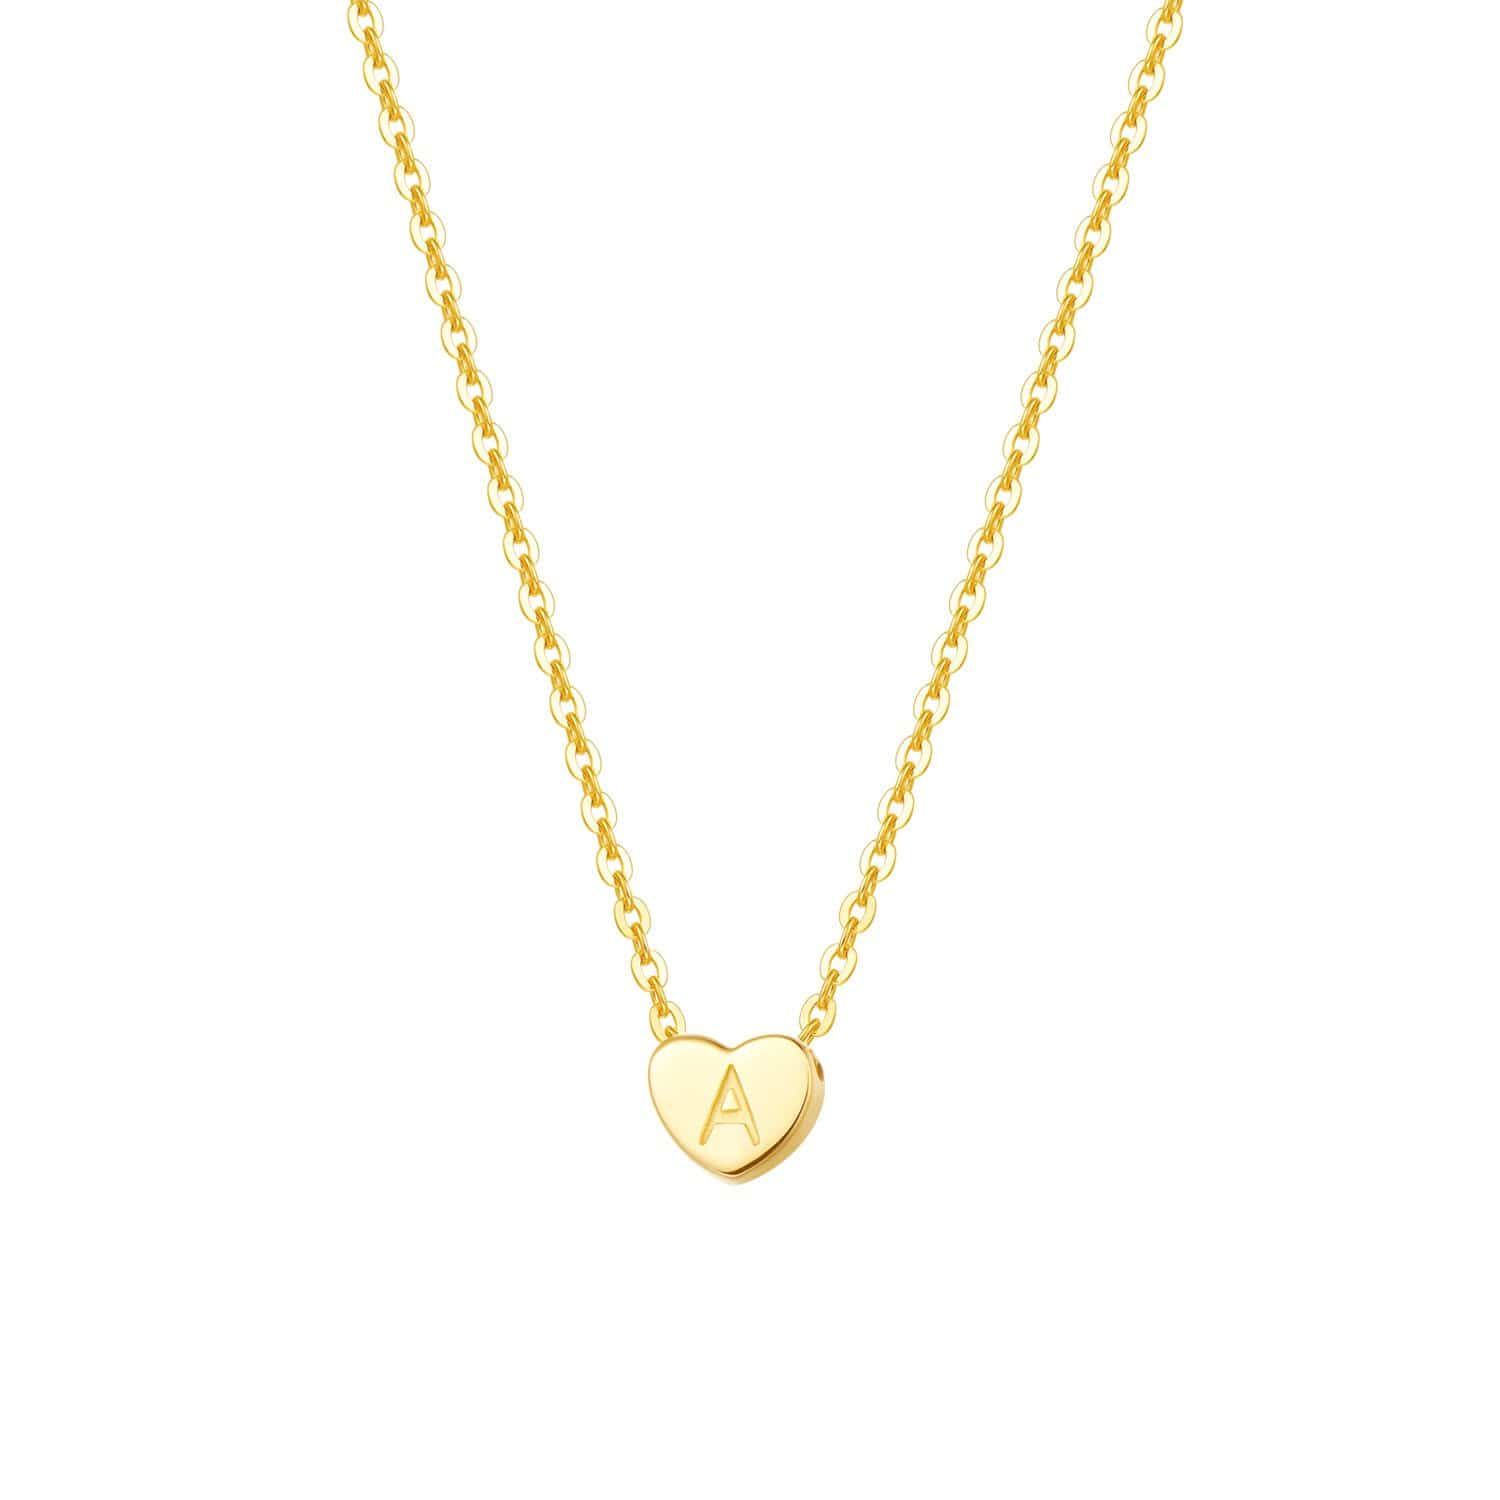 "A" 14K Solid Yellow Gold Heart Initial Dainty Pendant Necklace | FANCIME